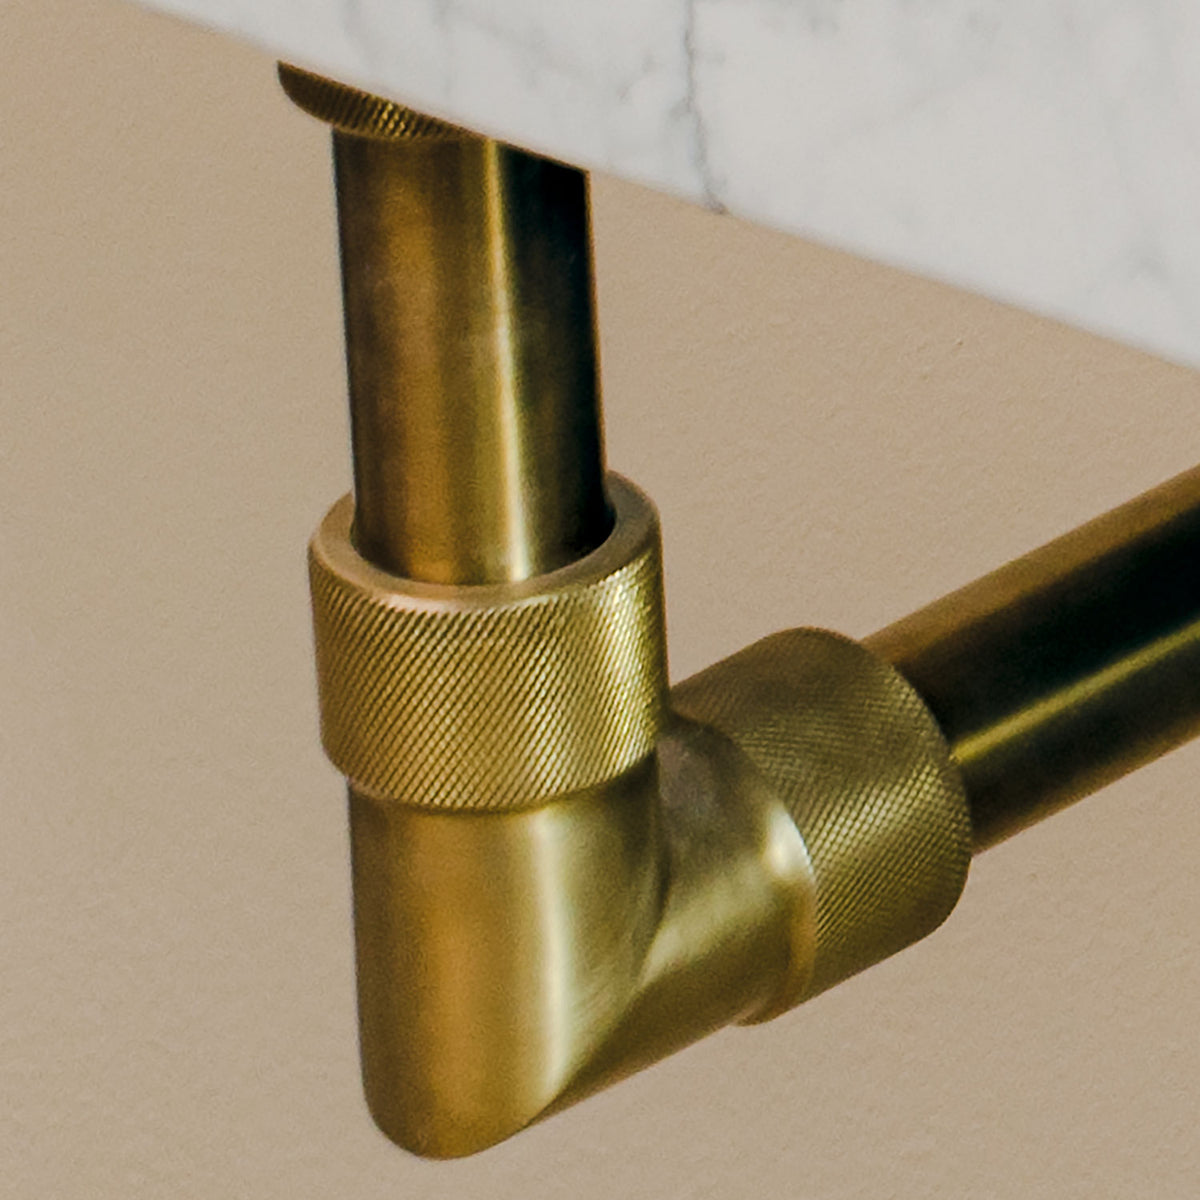 detail of Elemental Classic aged brass fitting image 2 of 3